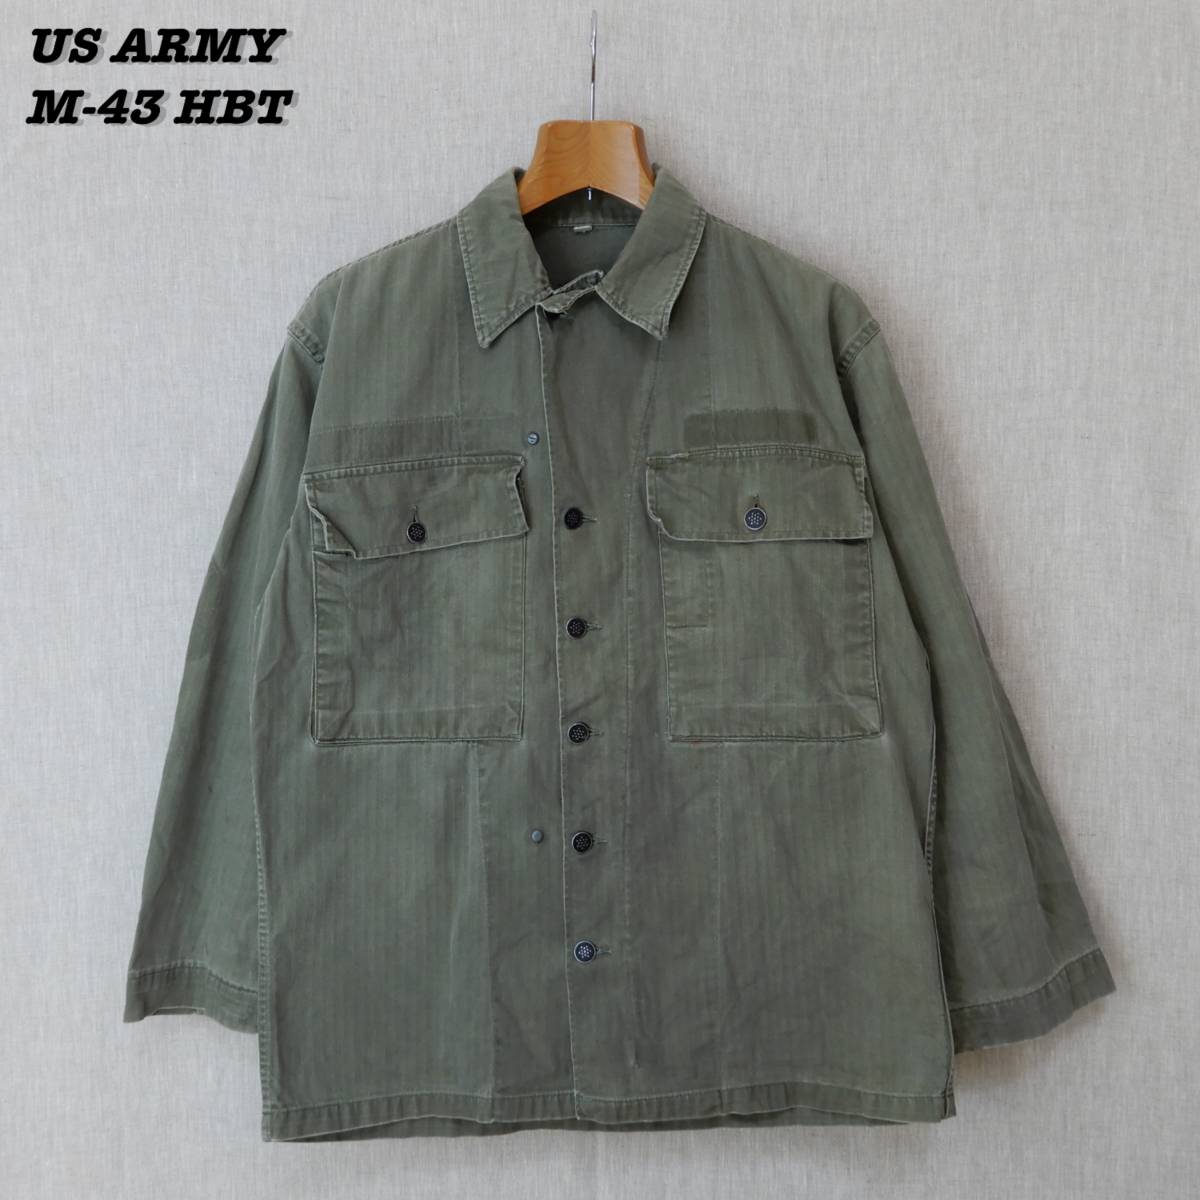 US ARMY M-43 HBT JACKET 1940s 38R Vintage アメリカ軍